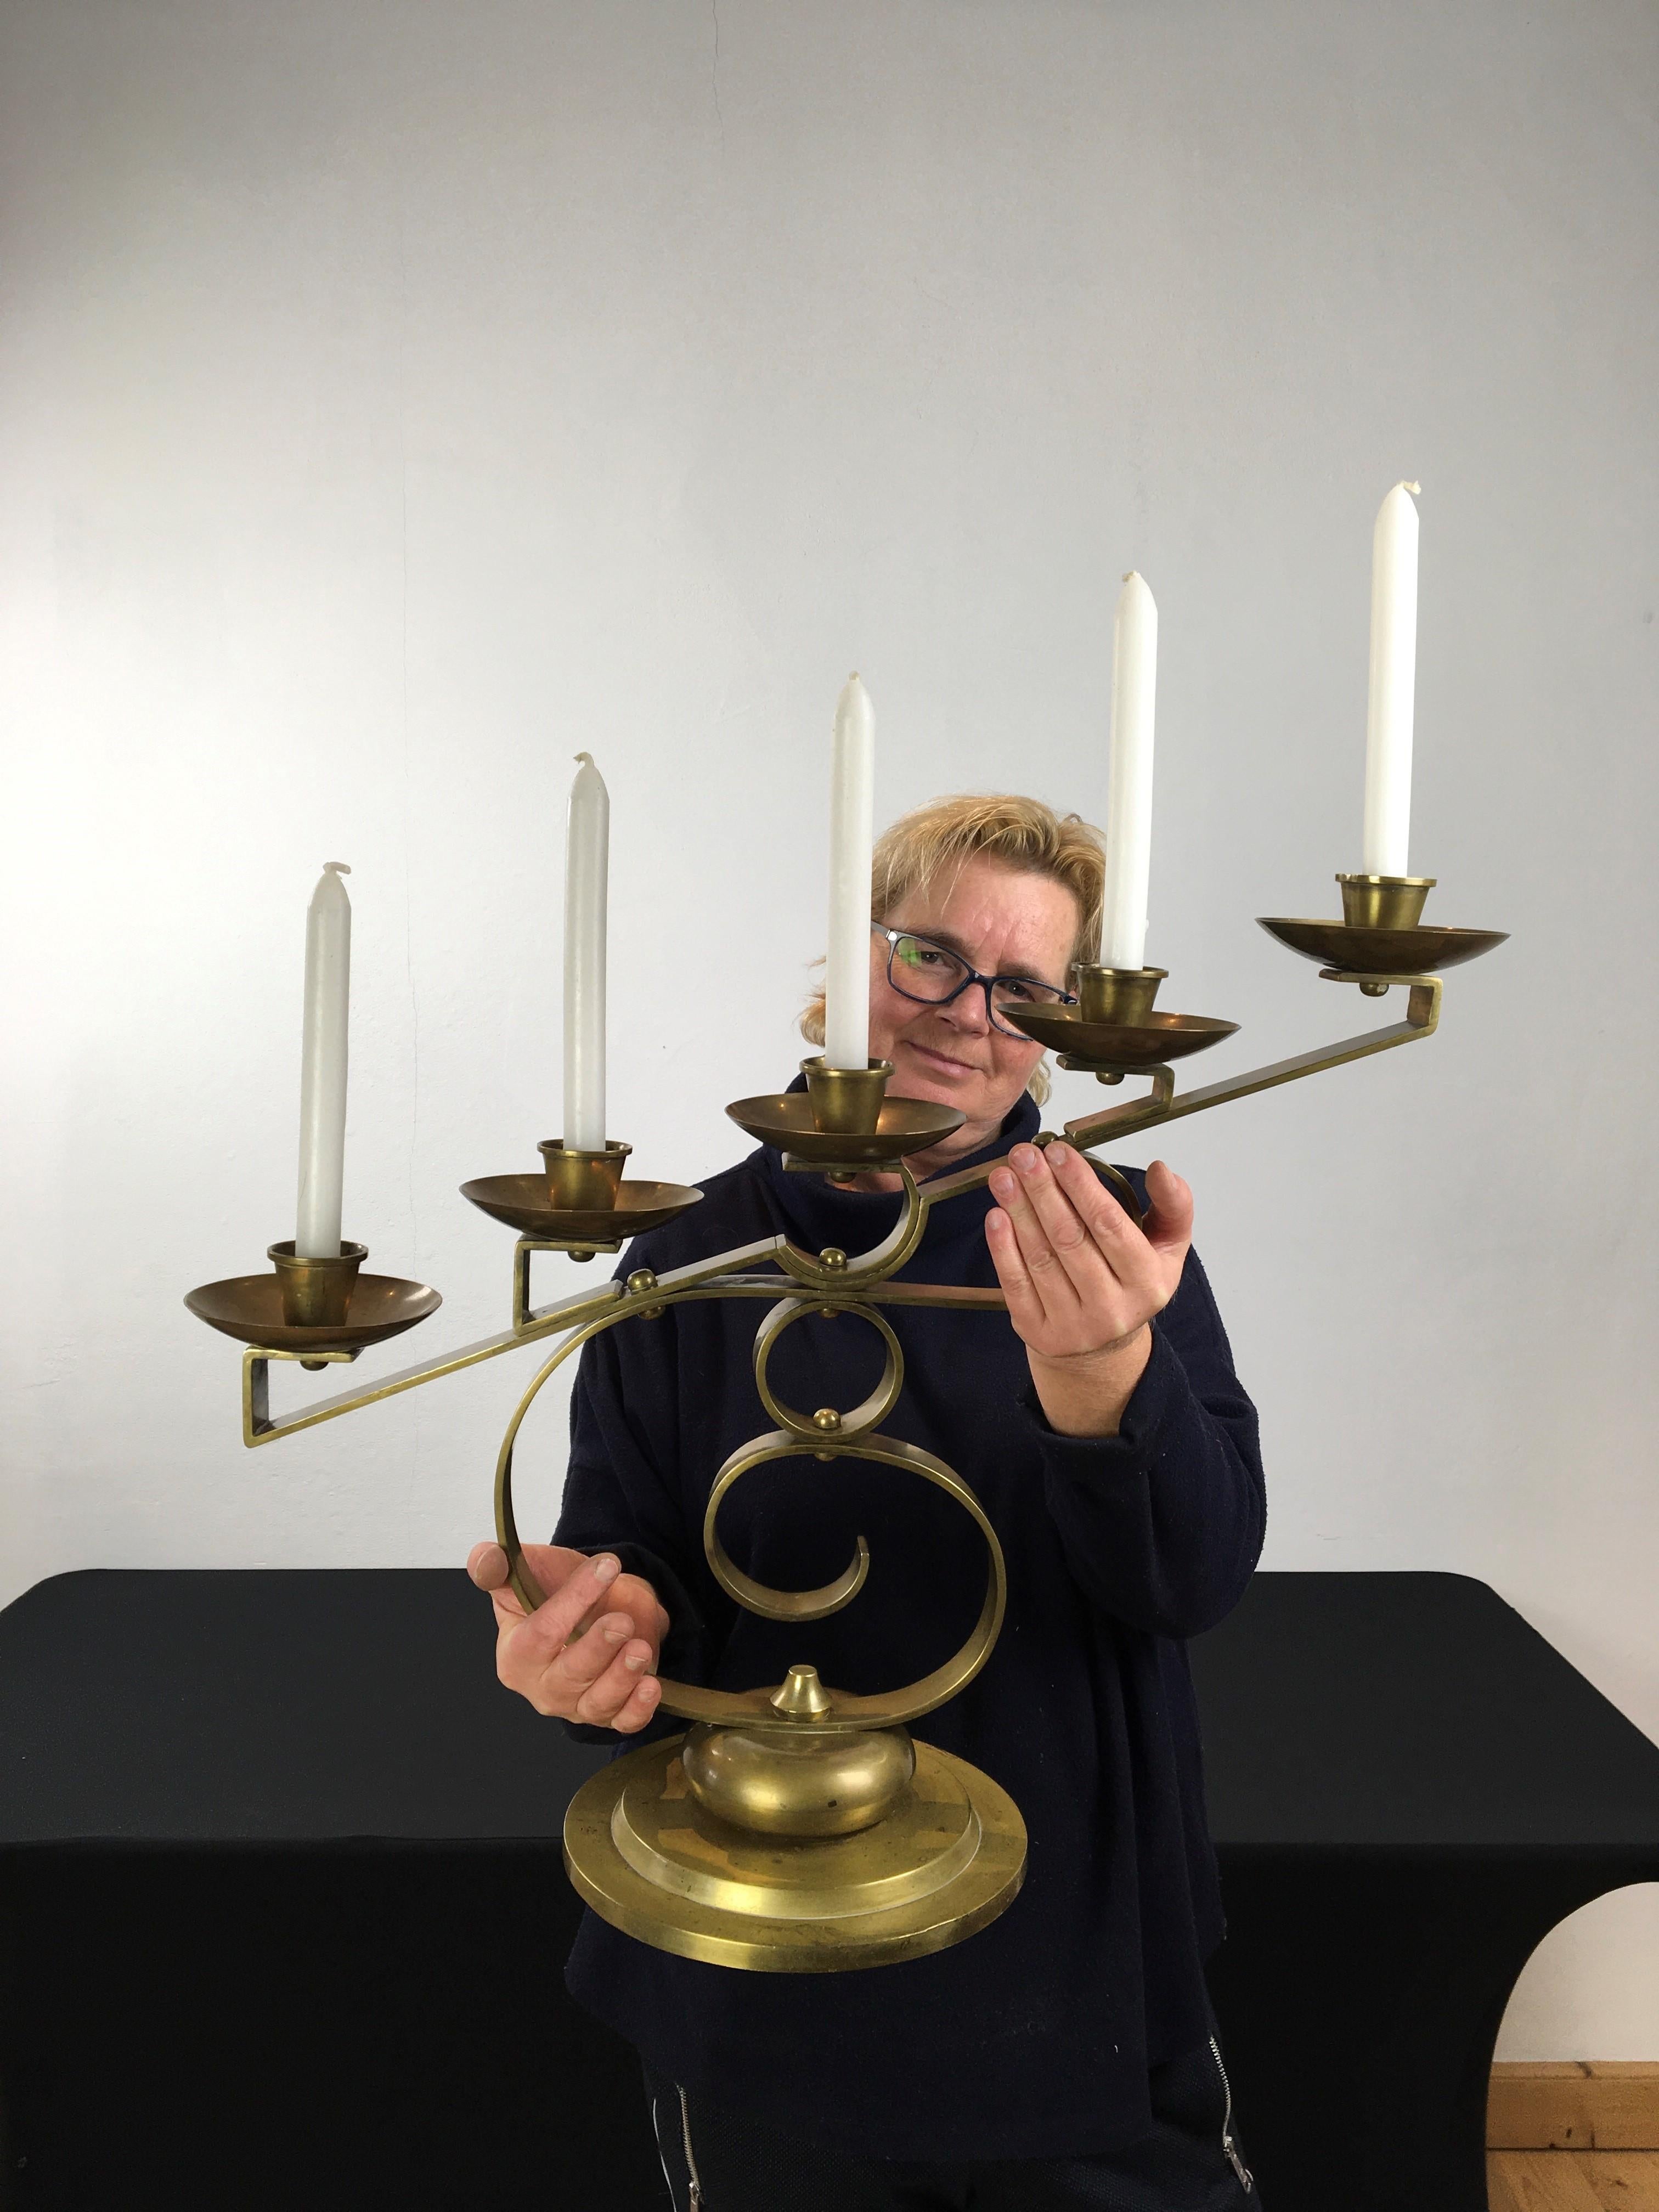 Large 5-armed Art Deco brass candle holder. 
A copper candleholder or candelabra for 5 candles 
which will look great on your table, sideboard or console - console table 
during the year or with the holidays at Christmas and New Year.

Beautiful and